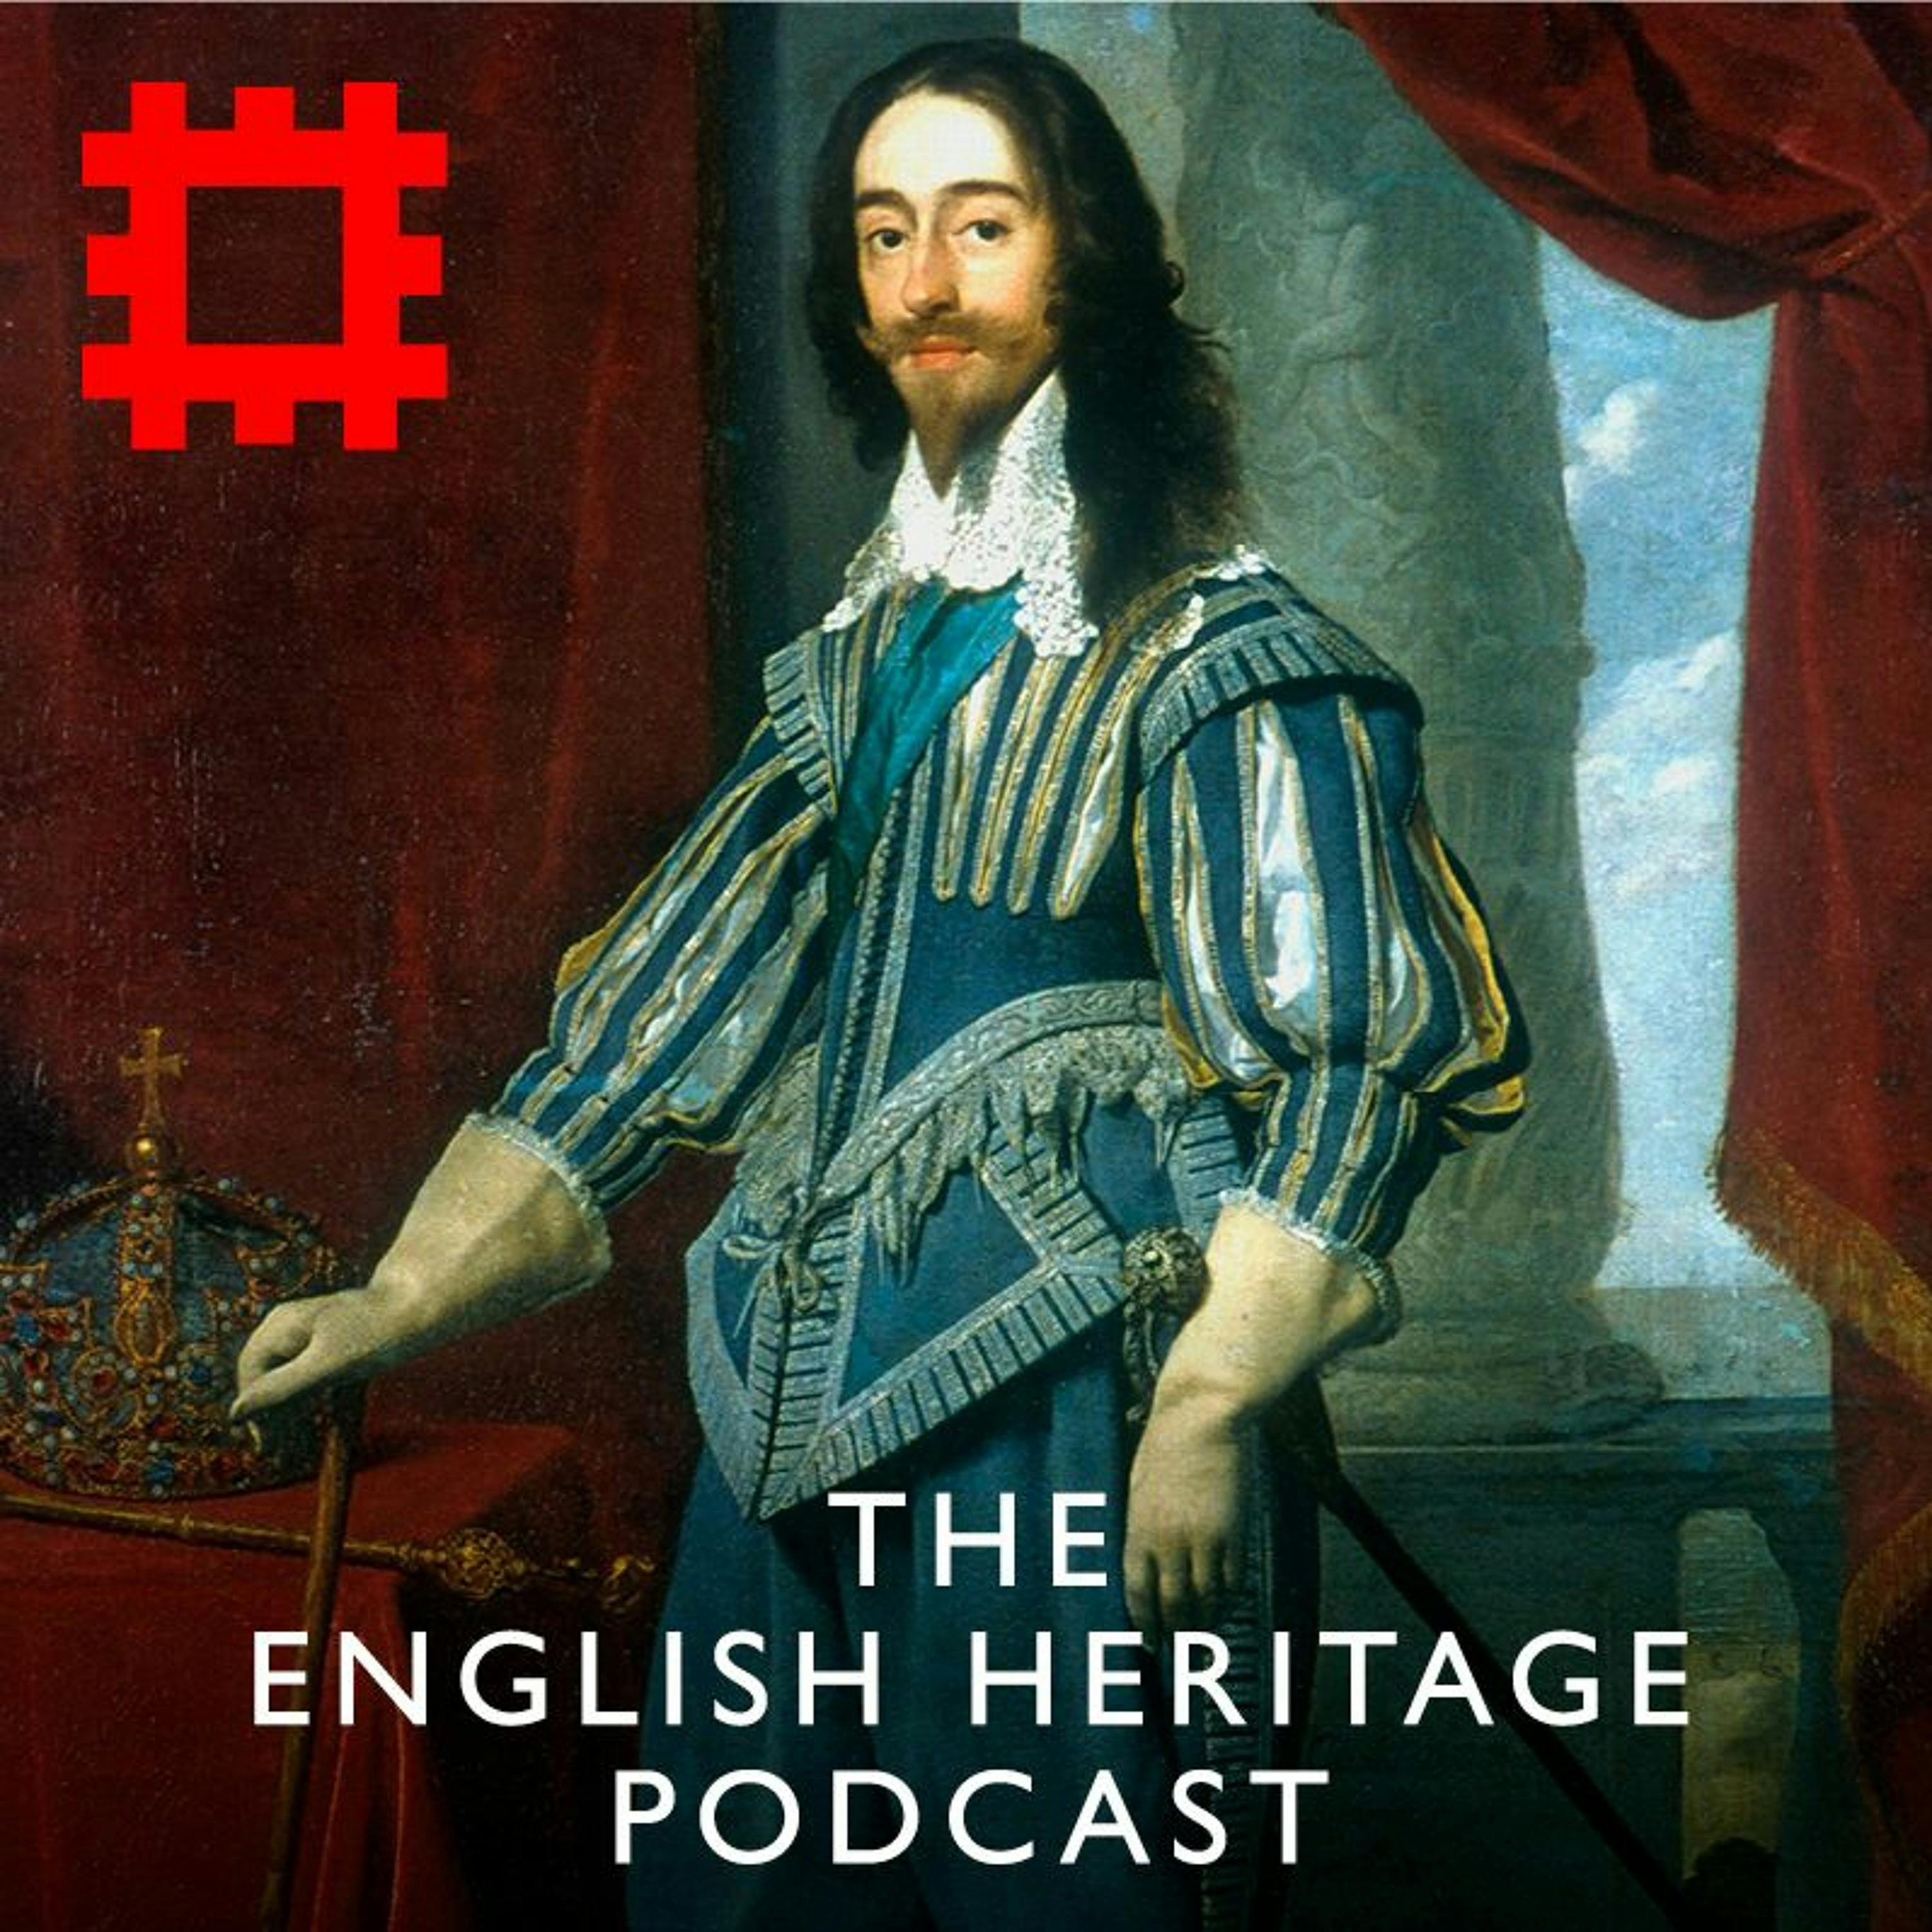 Episode 227 - Ask the experts: Everything you want to know about the Civil Wars and the Restoration